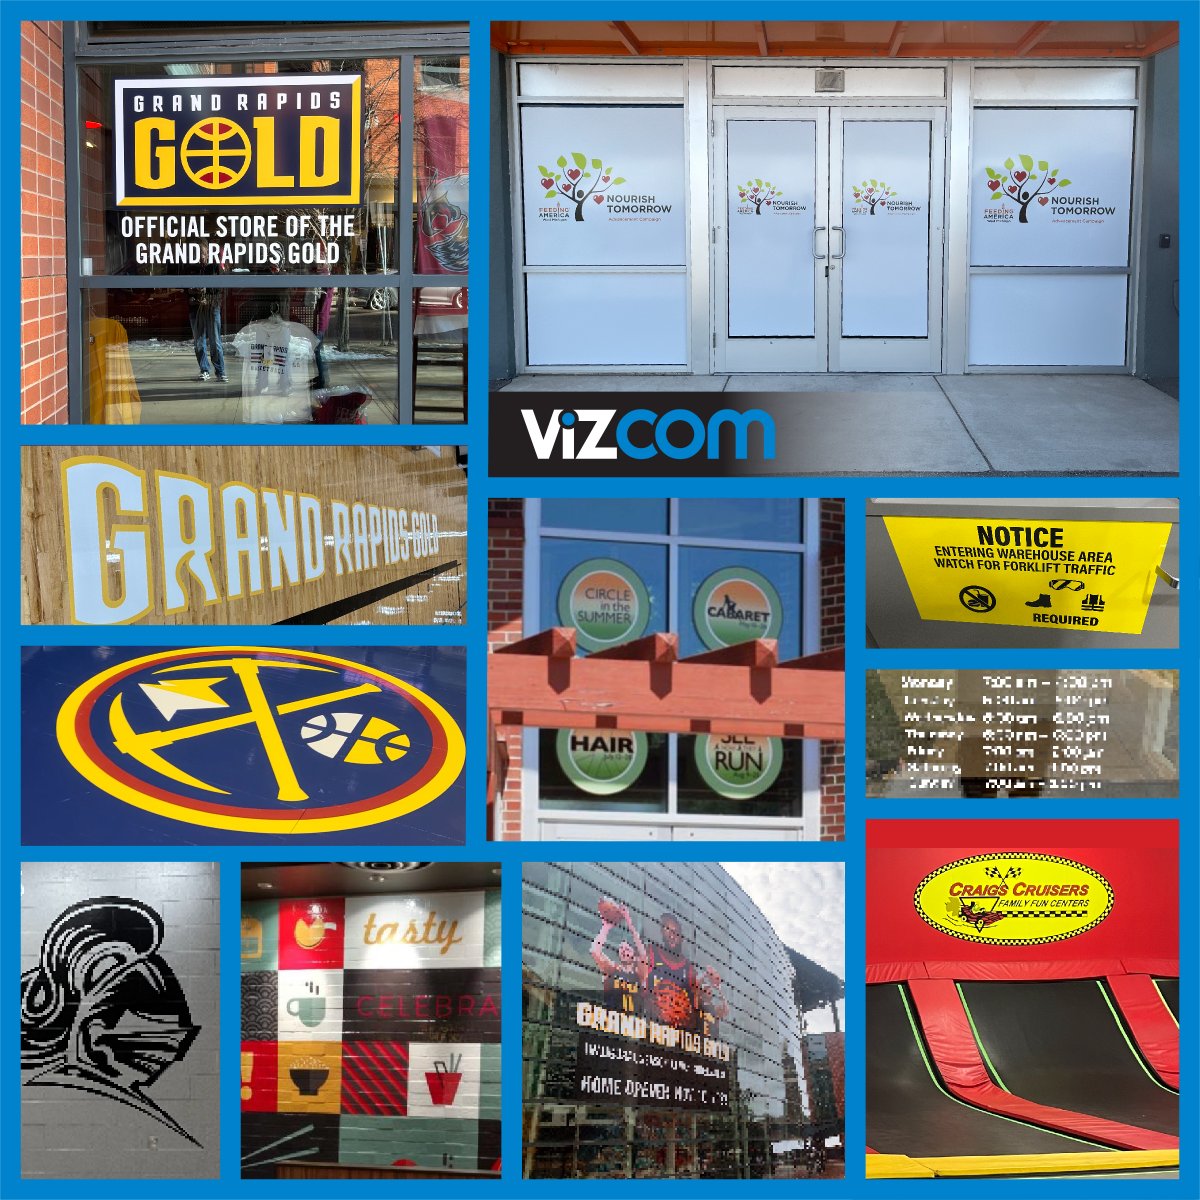 Get eye-catching laminated vinyl graphics for your storefront. Speak your brand's message through vibrant designs on your windows. 

#windowdesign #laminatedgraphics #windowgraphics #floorgraphics #wallgraphics #vinylgr